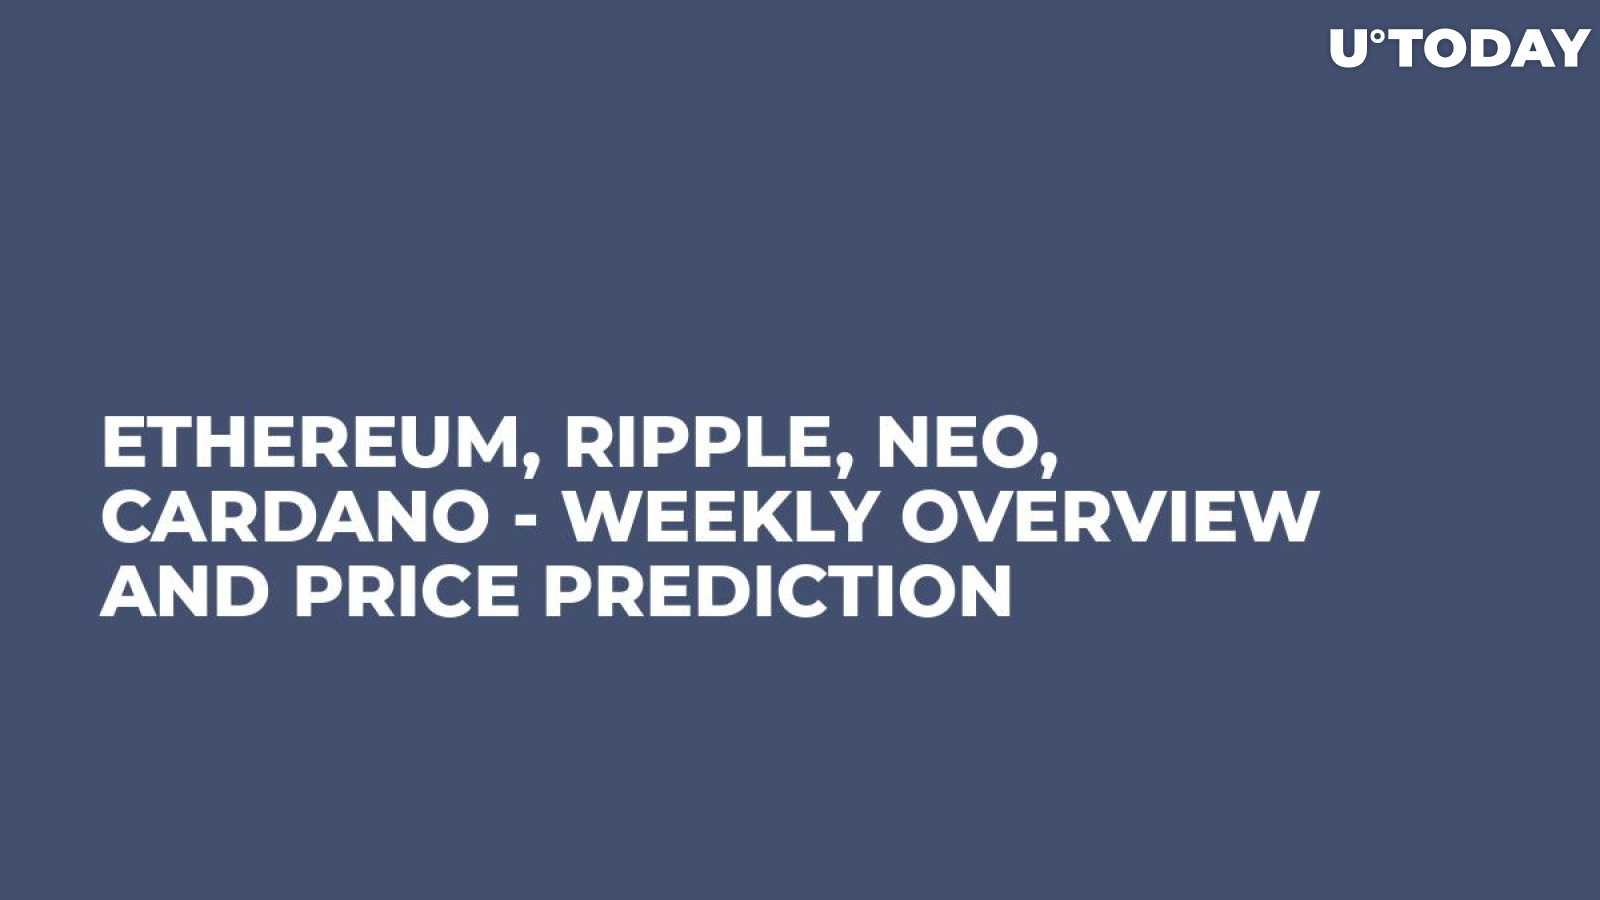 Ethereum, Ripple, NEO, Cardano - Weekly Overview and Price Prediction